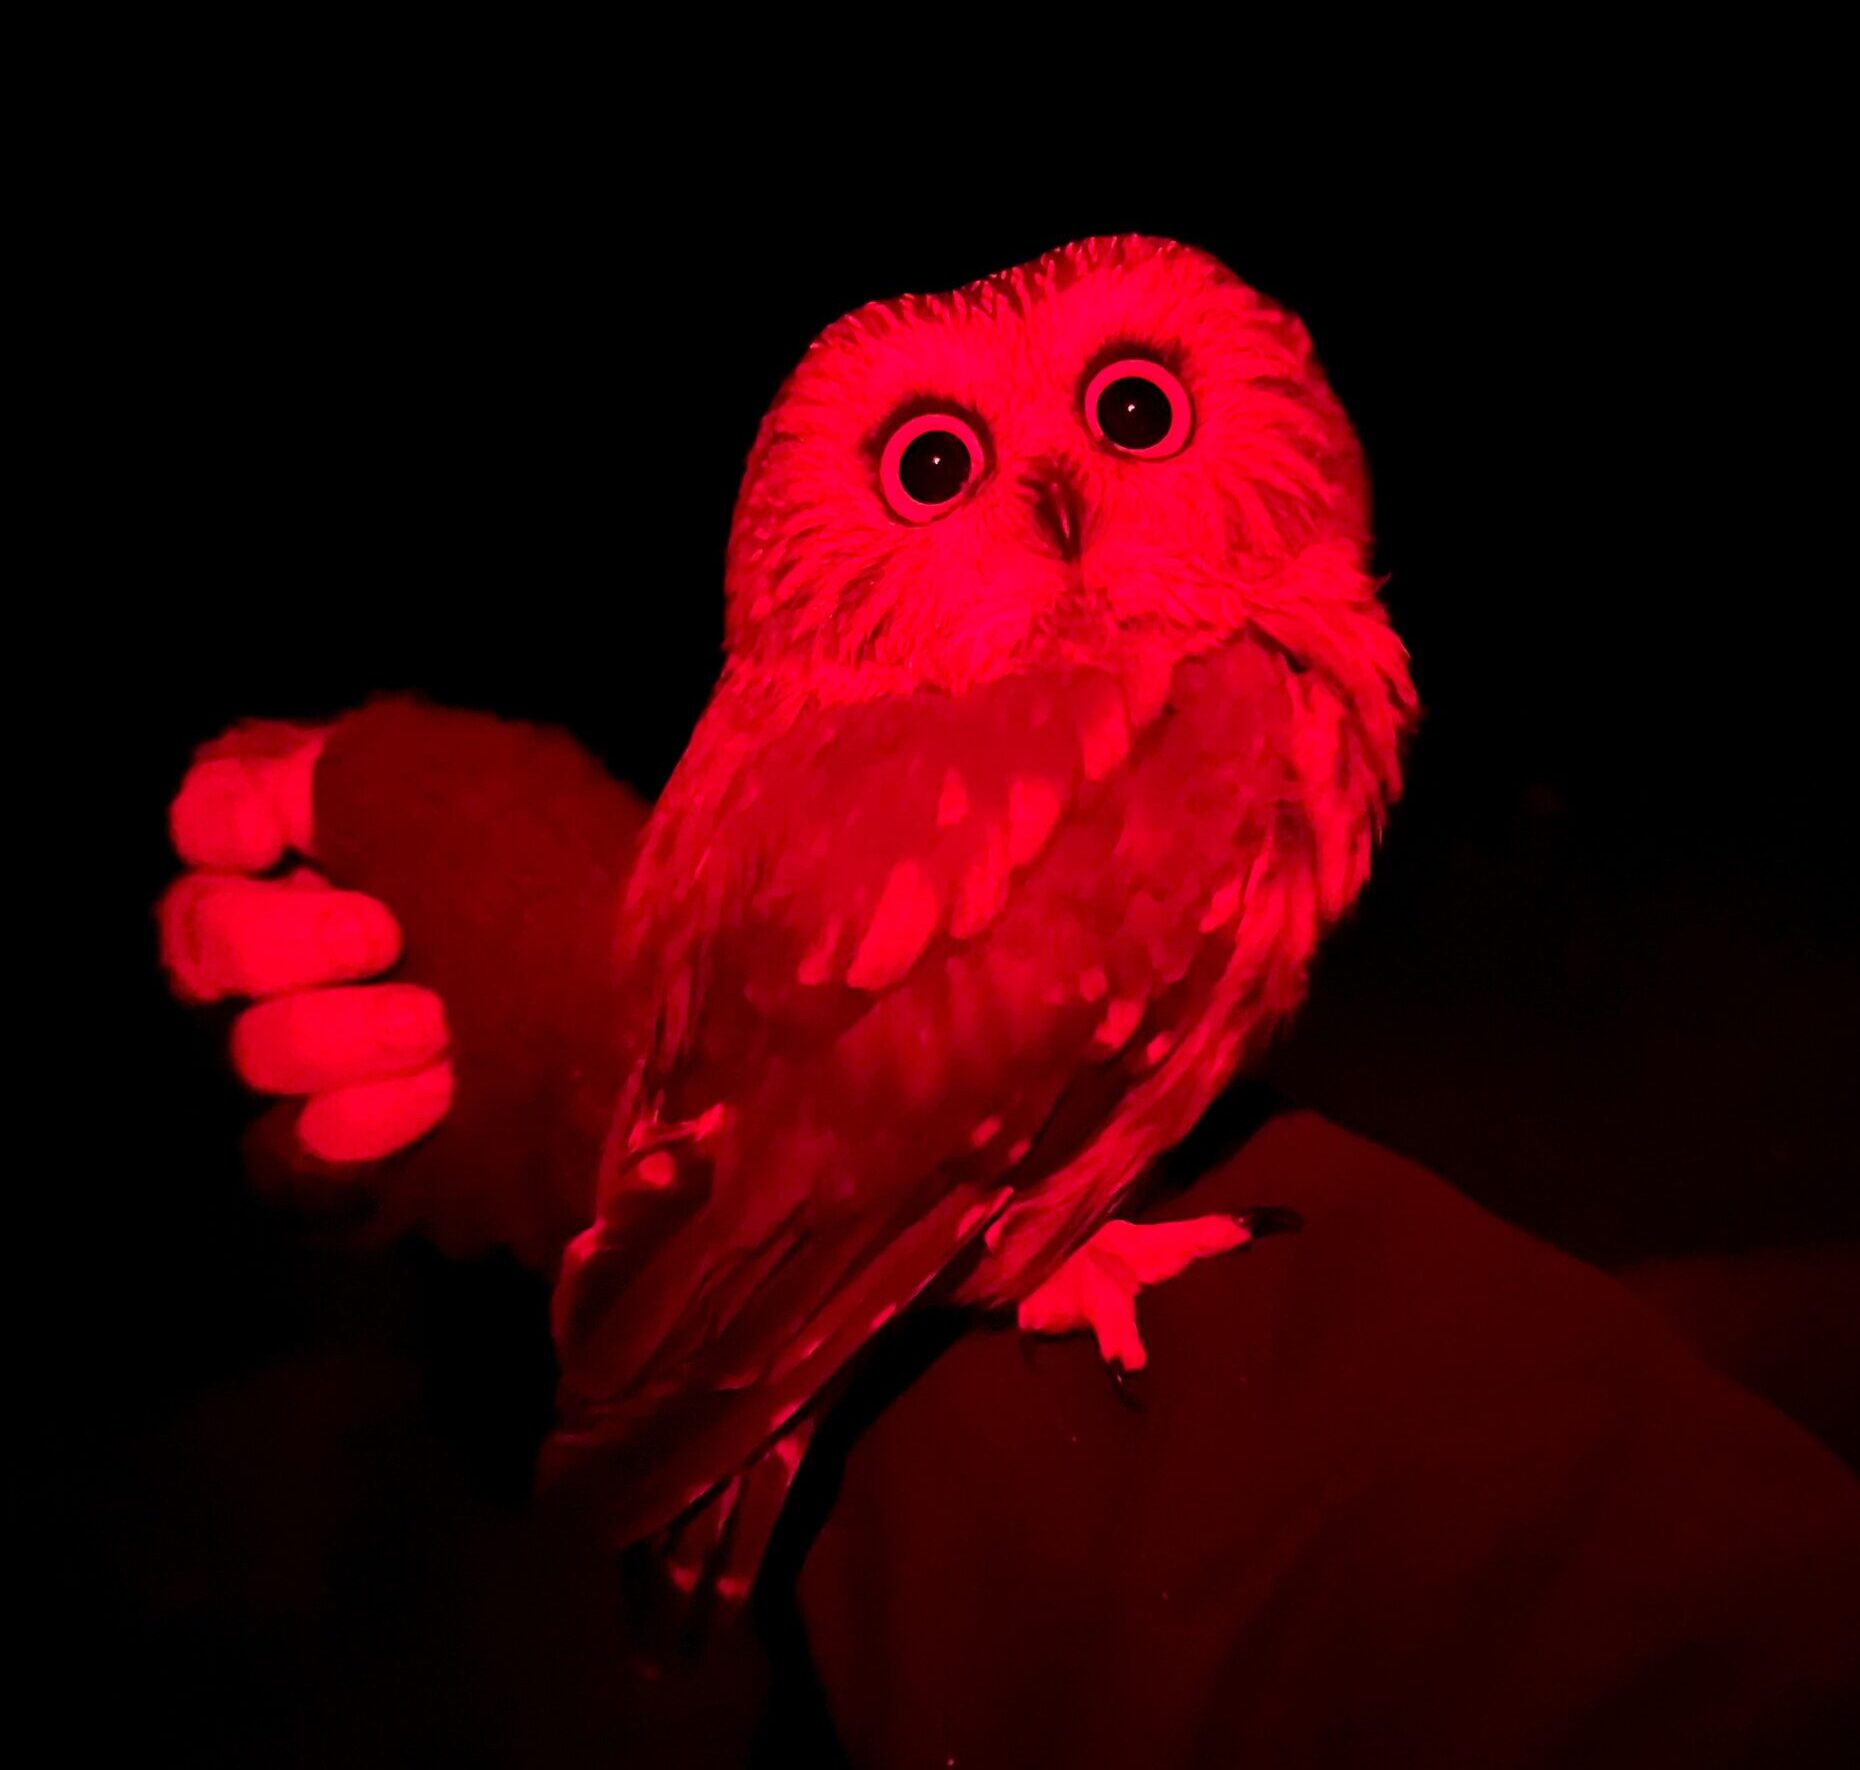 A small brown owl sits atop a biologists arm under the glow of a red headlamp light. it is looking up toward the camera with an adorably surprised expression